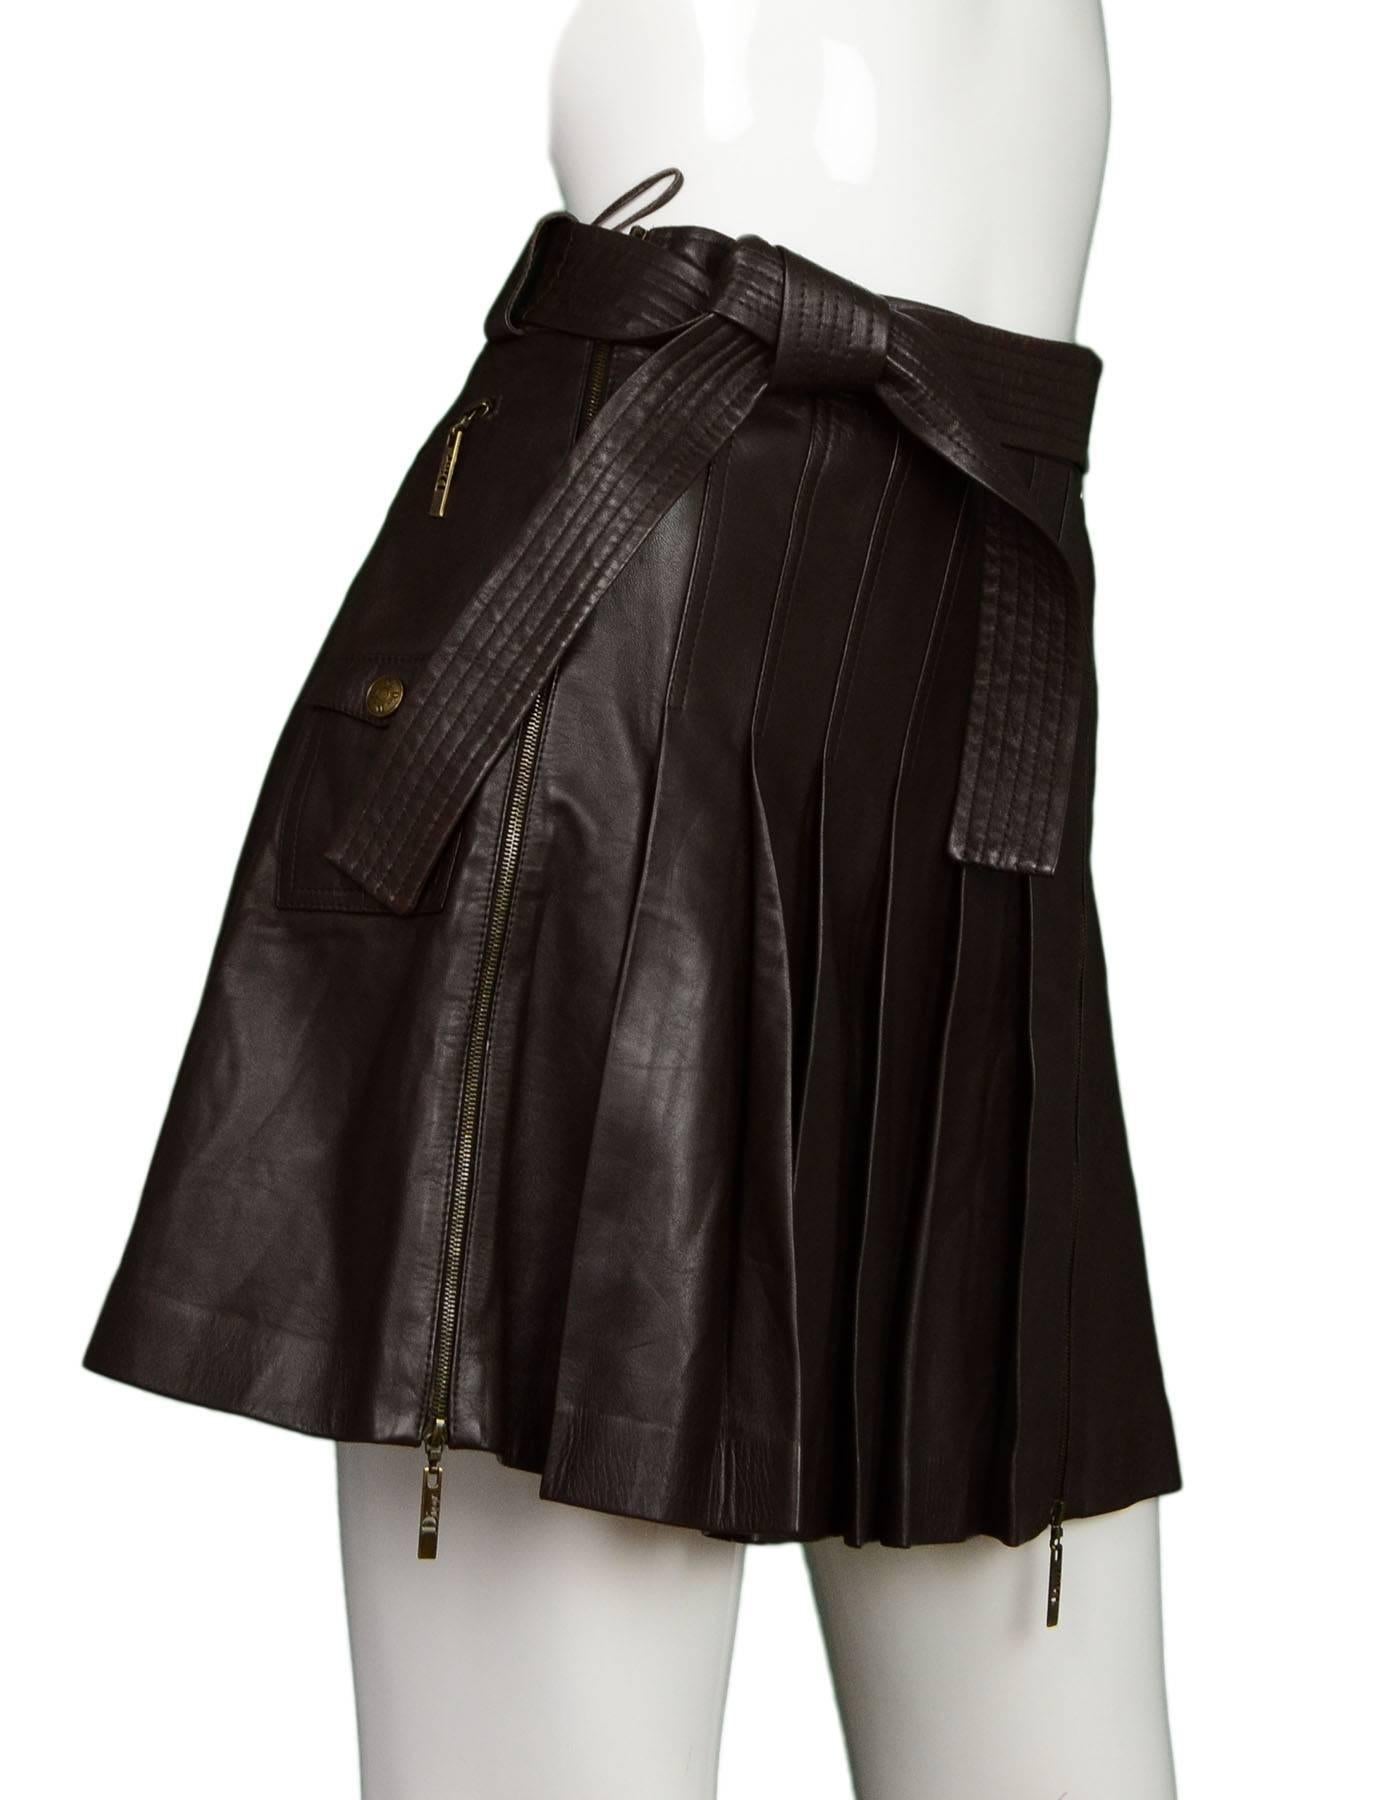 Christian Dior NWT Brown Leather Pleated Skirt 
Features waist tie belt

Made In: France
Color: Brown
Composition: 100% lambskin
Lining: Brown, 94% silk, 6%  lycra
Closure/Opening: Front double hip zippers
Exterior Pockets: One cargo pocket